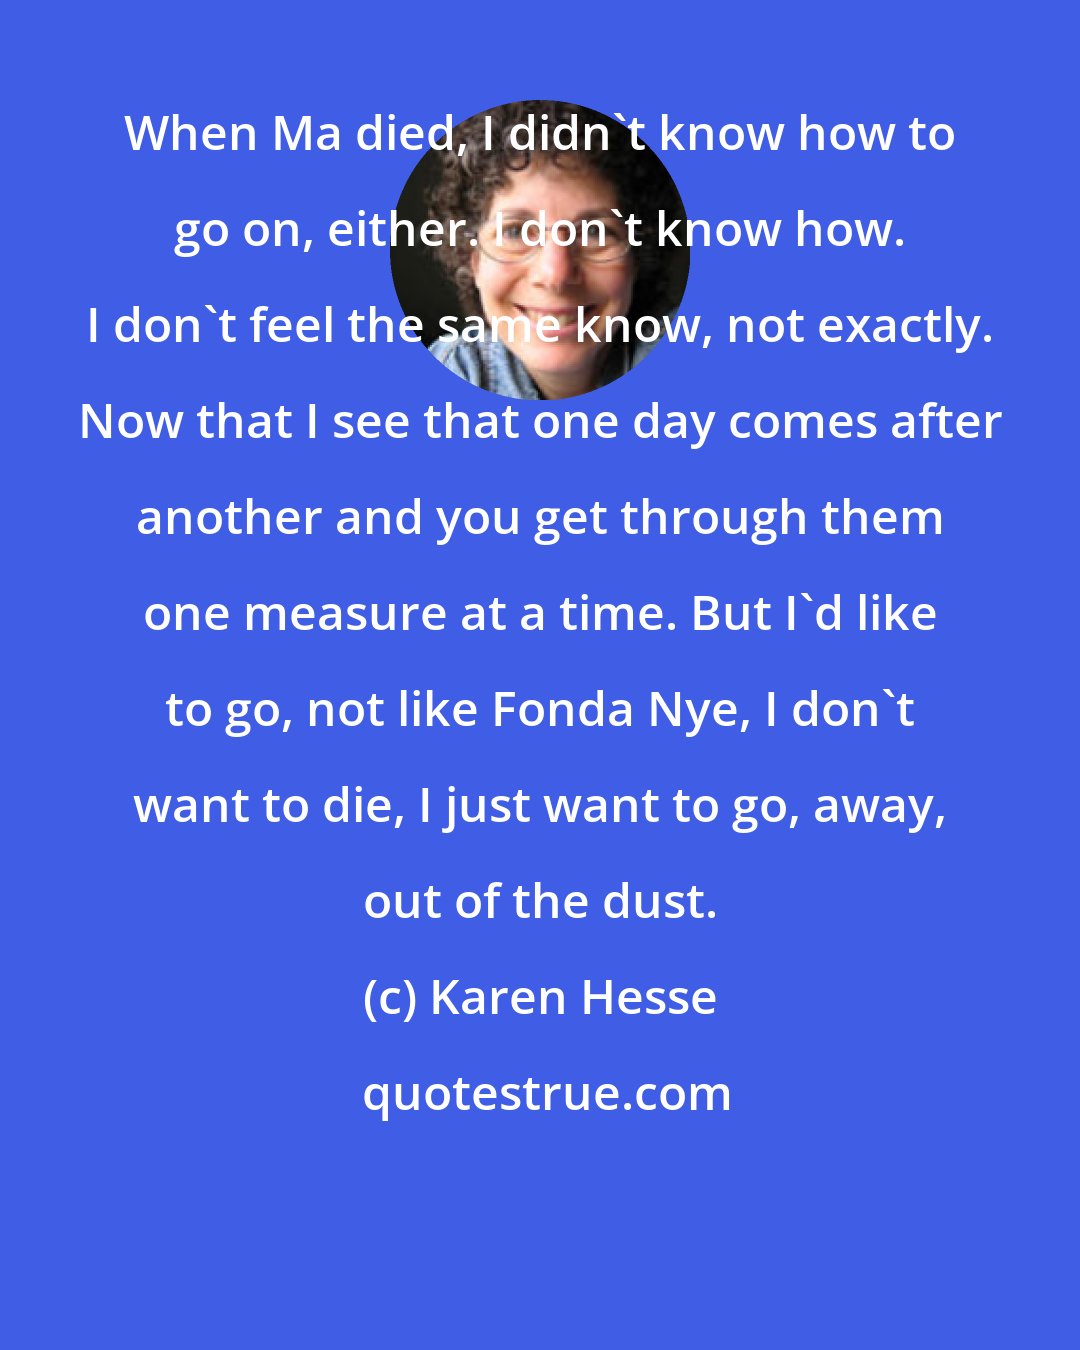 Karen Hesse: When Ma died, I didn't know how to go on, either. I don't know how. I don't feel the same know, not exactly. Now that I see that one day comes after another and you get through them one measure at a time. But I'd like to go, not like Fonda Nye, I don't want to die, I just want to go, away, out of the dust.